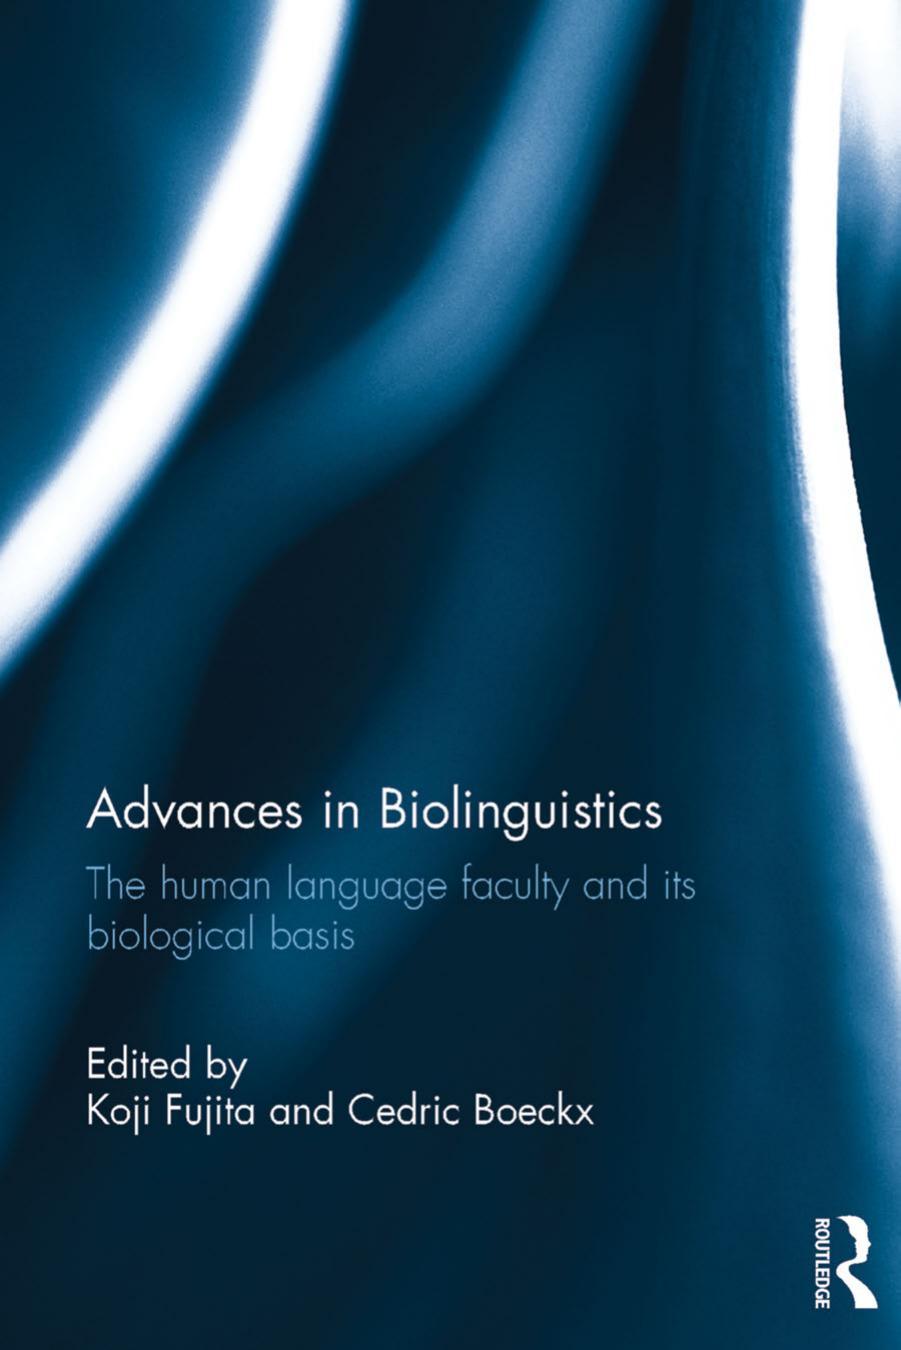 Advances in Biolinguistics: The Human Language Faculty and Its Biological Basis